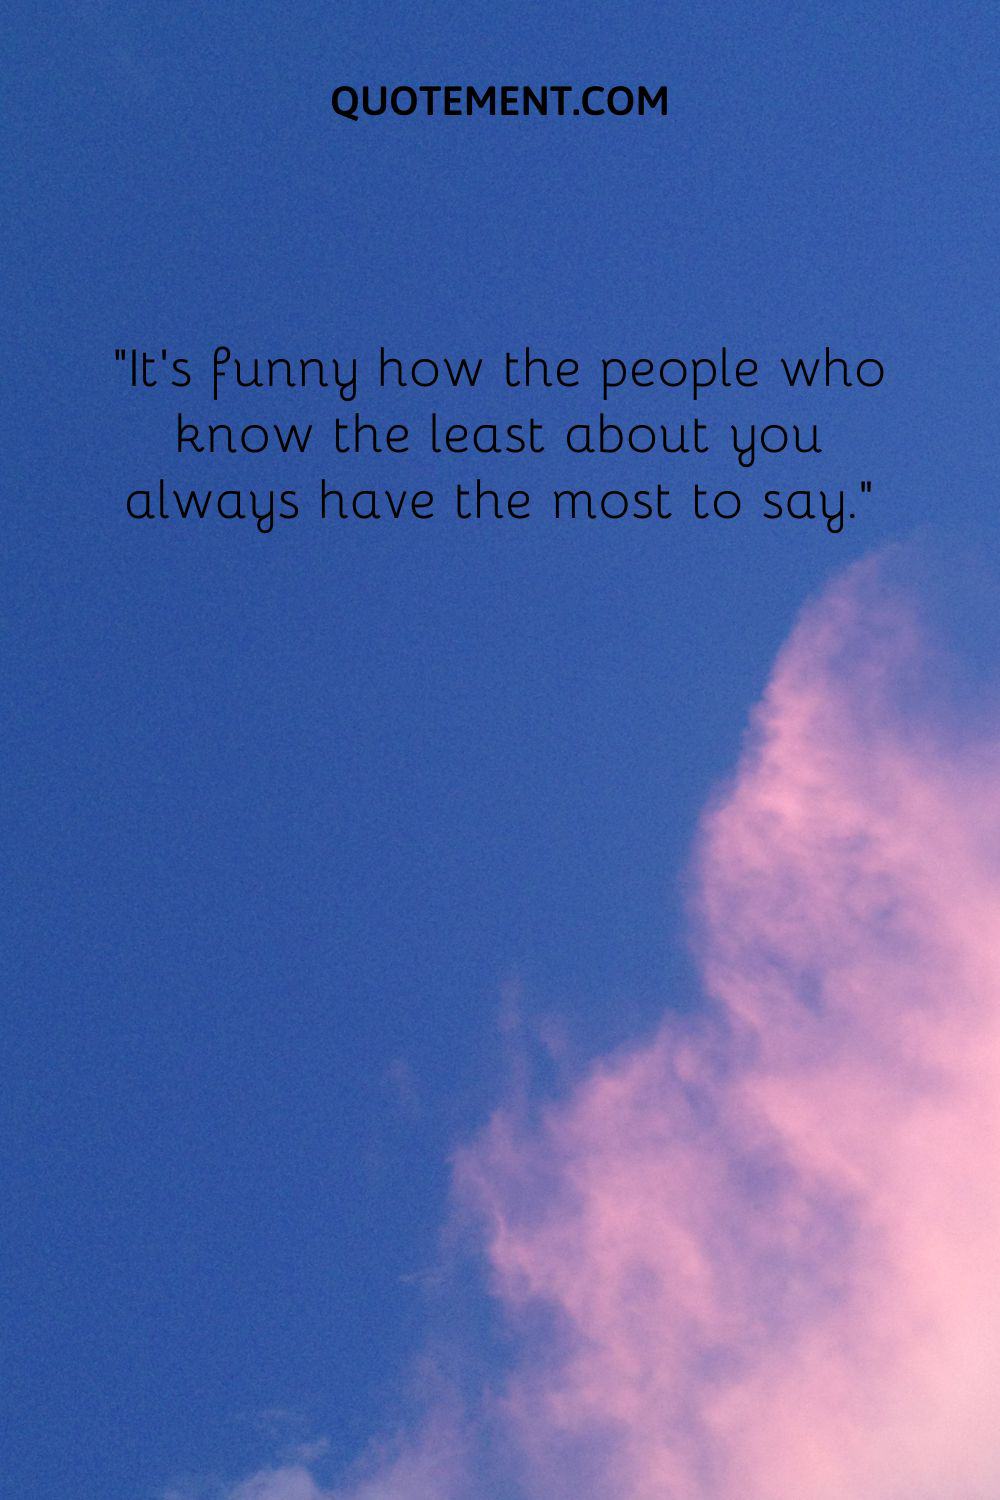 It’s funny how the people who know the least about you always have the most to say